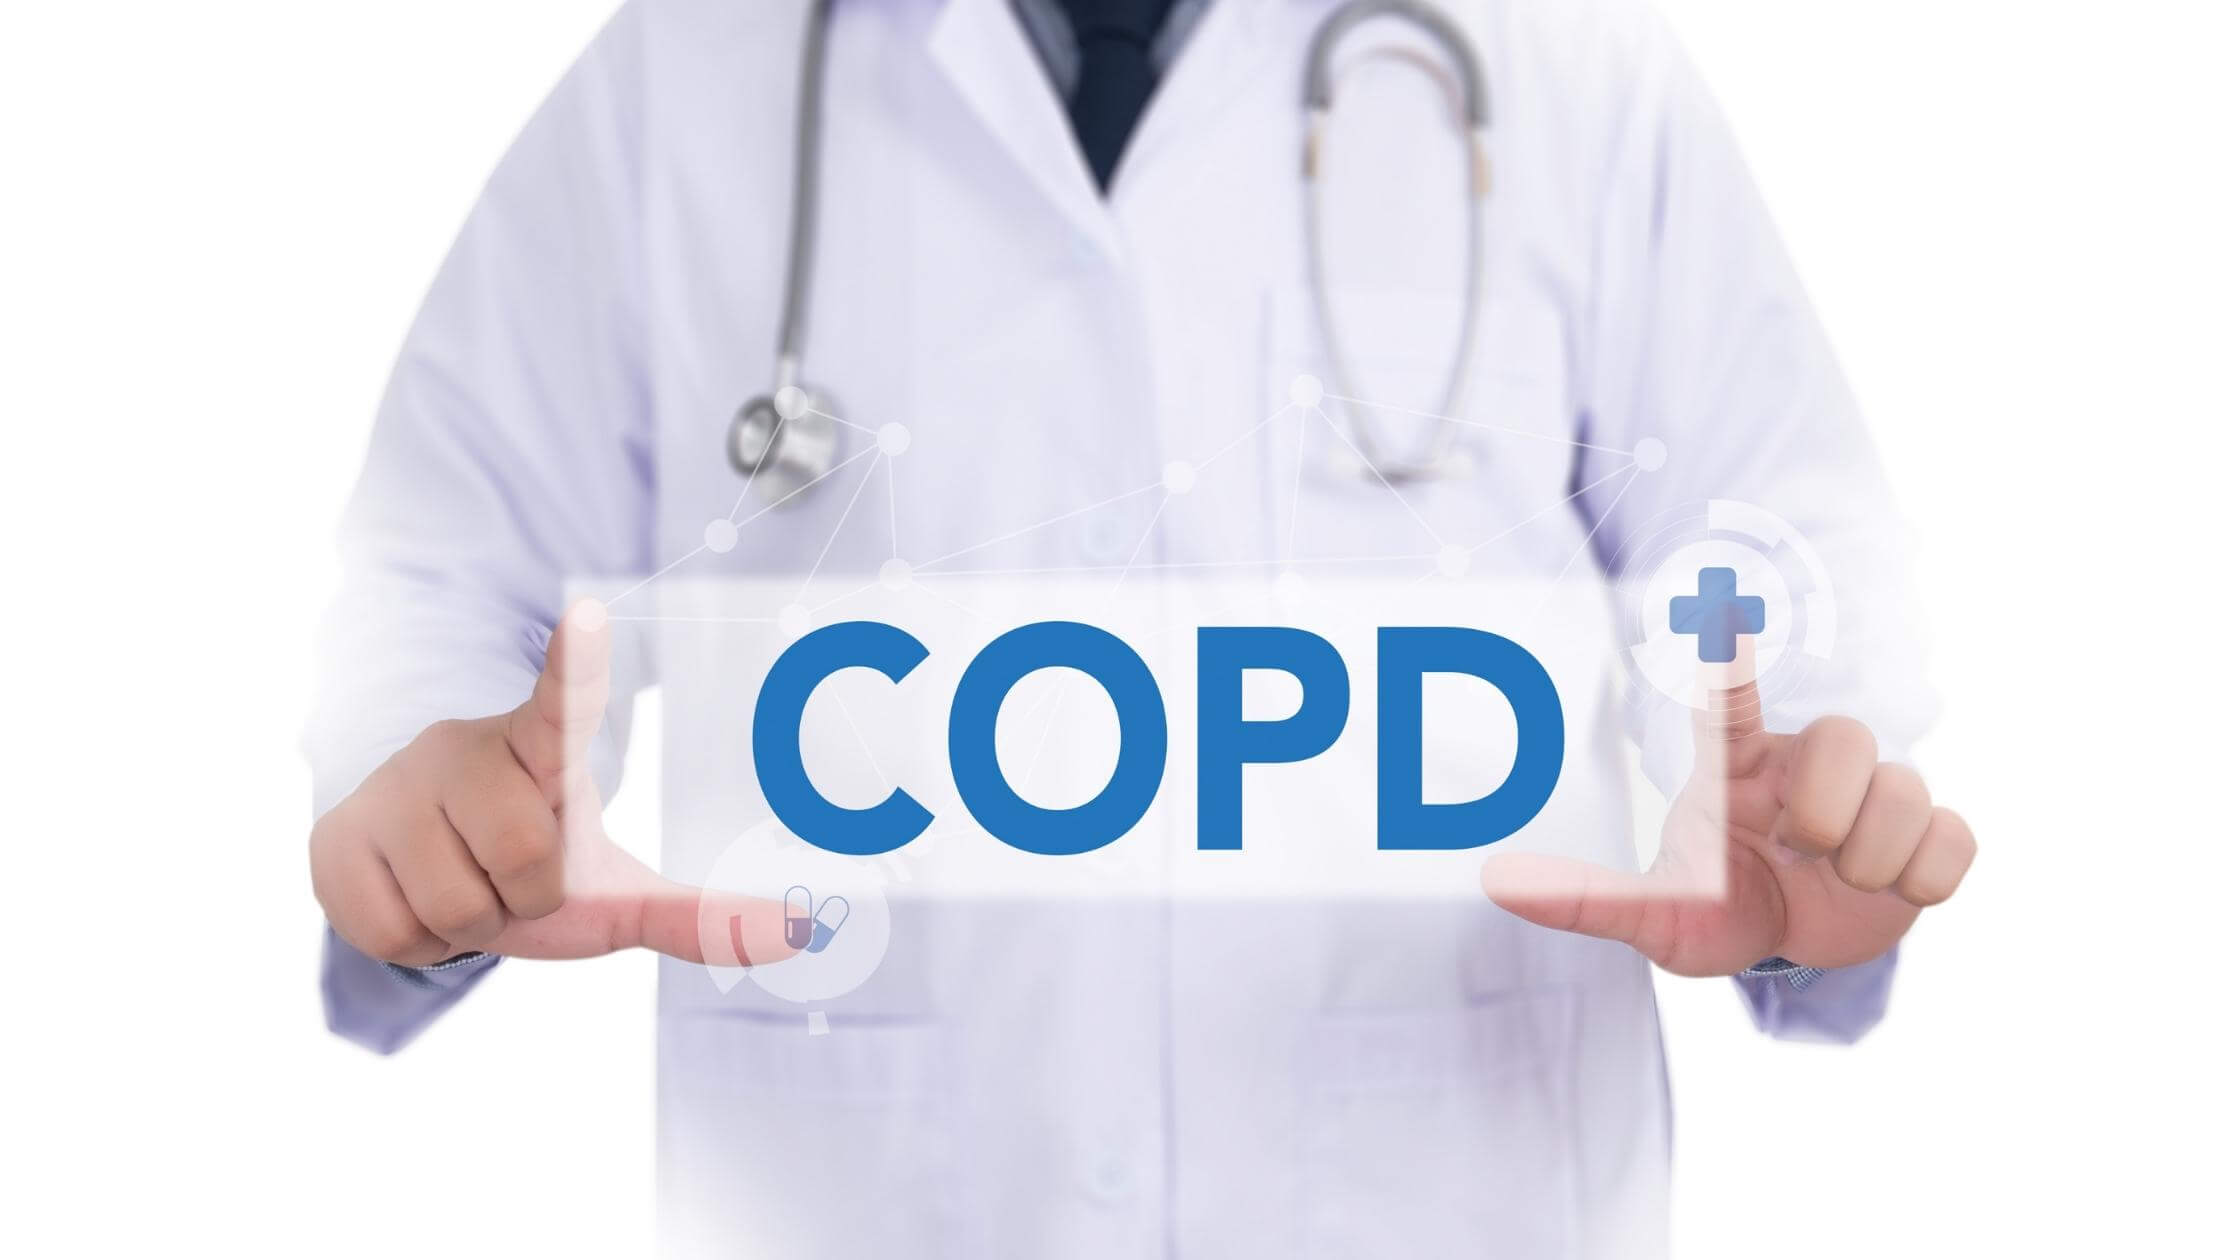 COPD and doctor